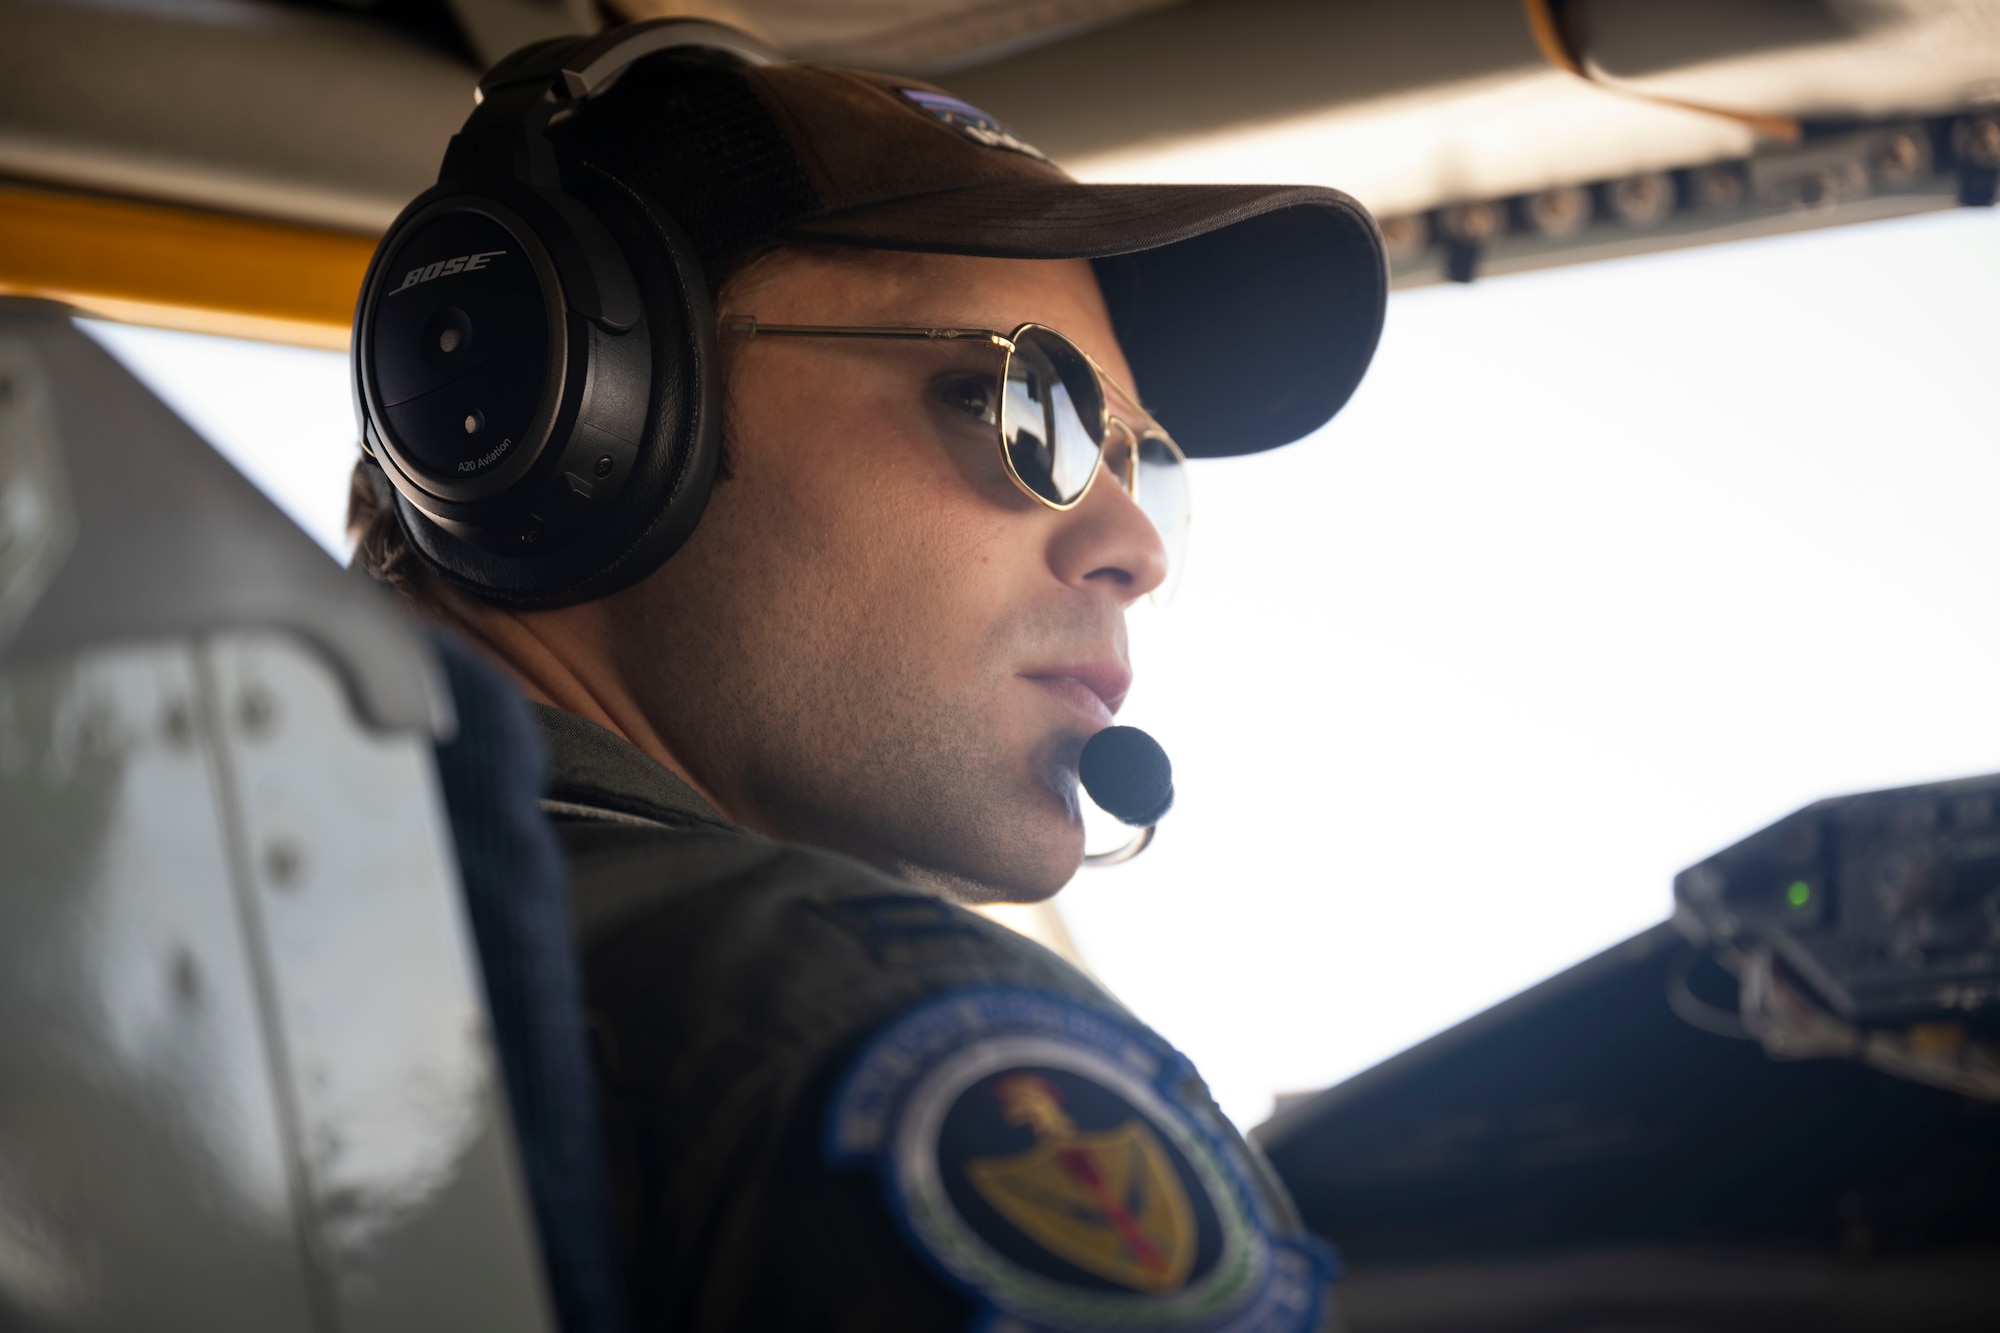 U.S. Air Force Capt. Bradley Mokris, 351st Air Refueling Squadron pilot, flies a KC-135 Stratotanker aircraft assigned to the 100th Air Refueling Wing at Royal Air Force Mildenhall, England, Sept. 1, 2021. The 100th ARW is the only permanent U.S. air refueling wing in the European theater, providing the critical air refueling “bridge” which allows the Expeditionary Air Force to deploy around the globe at a moment’s notice. (U.S. Air Force photo by Airman Alvaro Villagomez)